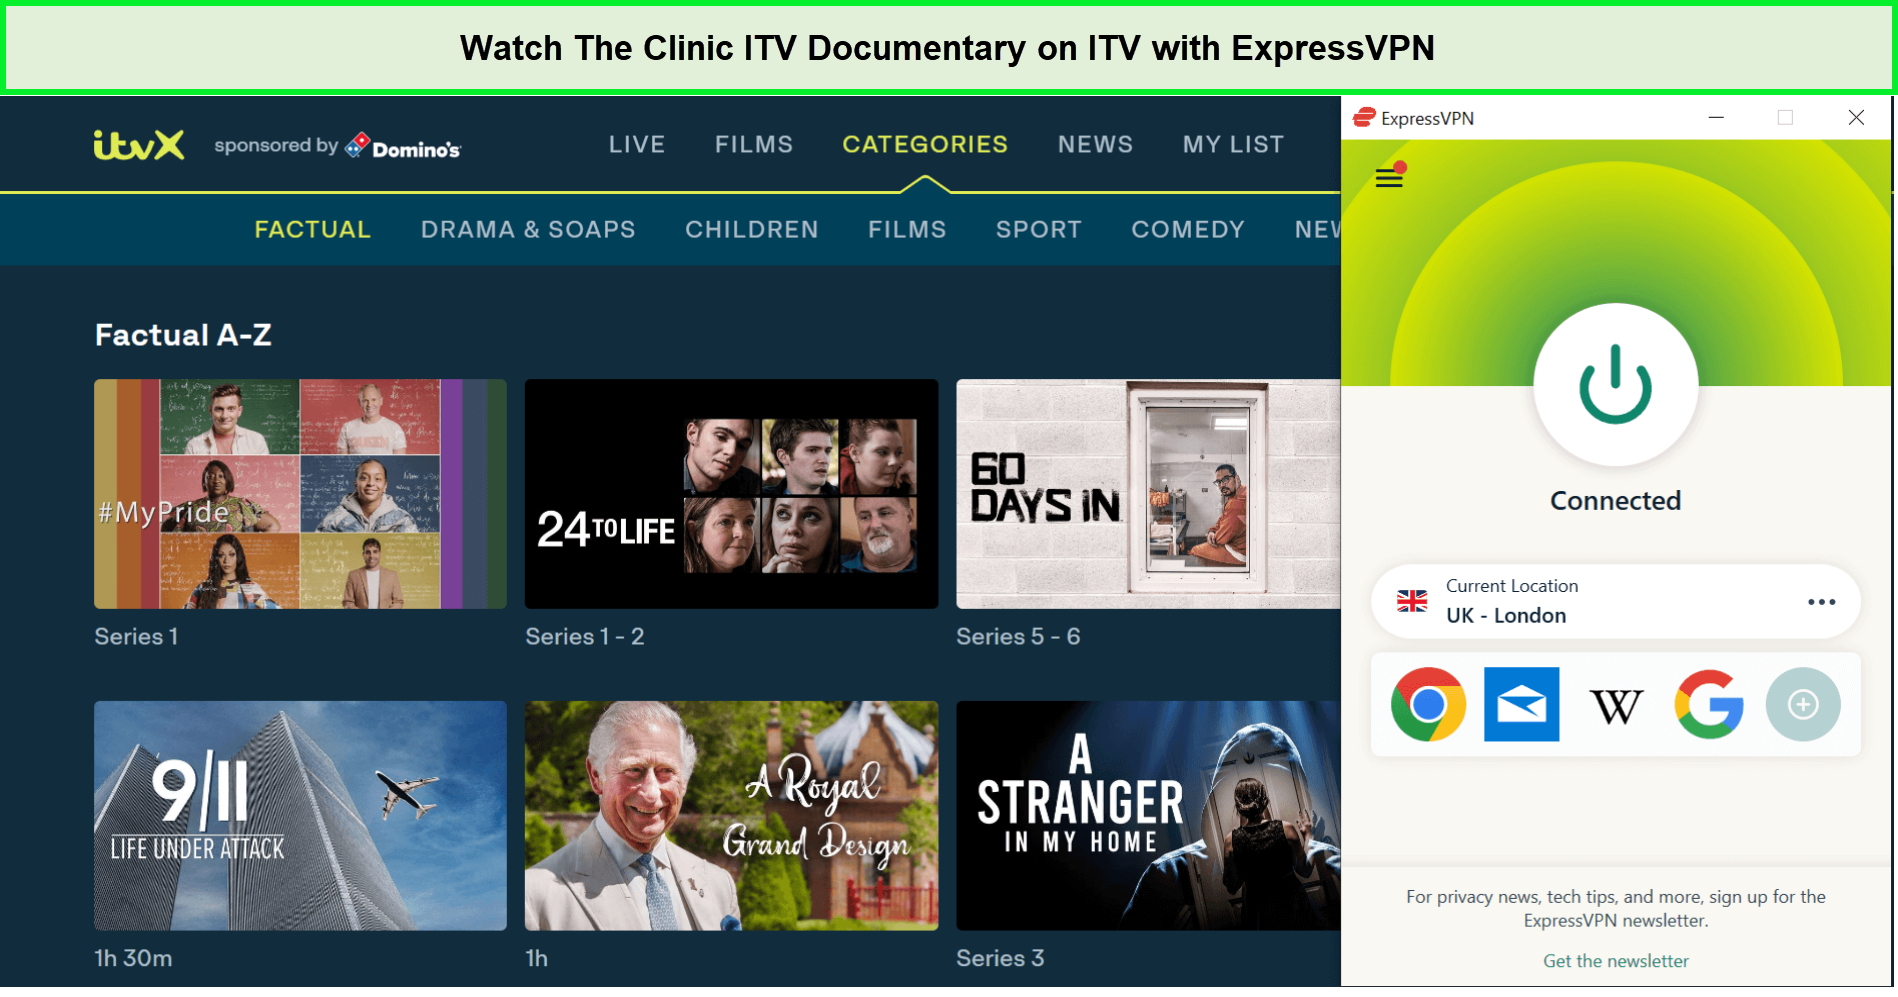 Watch-The-Clinic-ITV-Documentary-in-Germany-on-ITV-with-ExpressVPN.